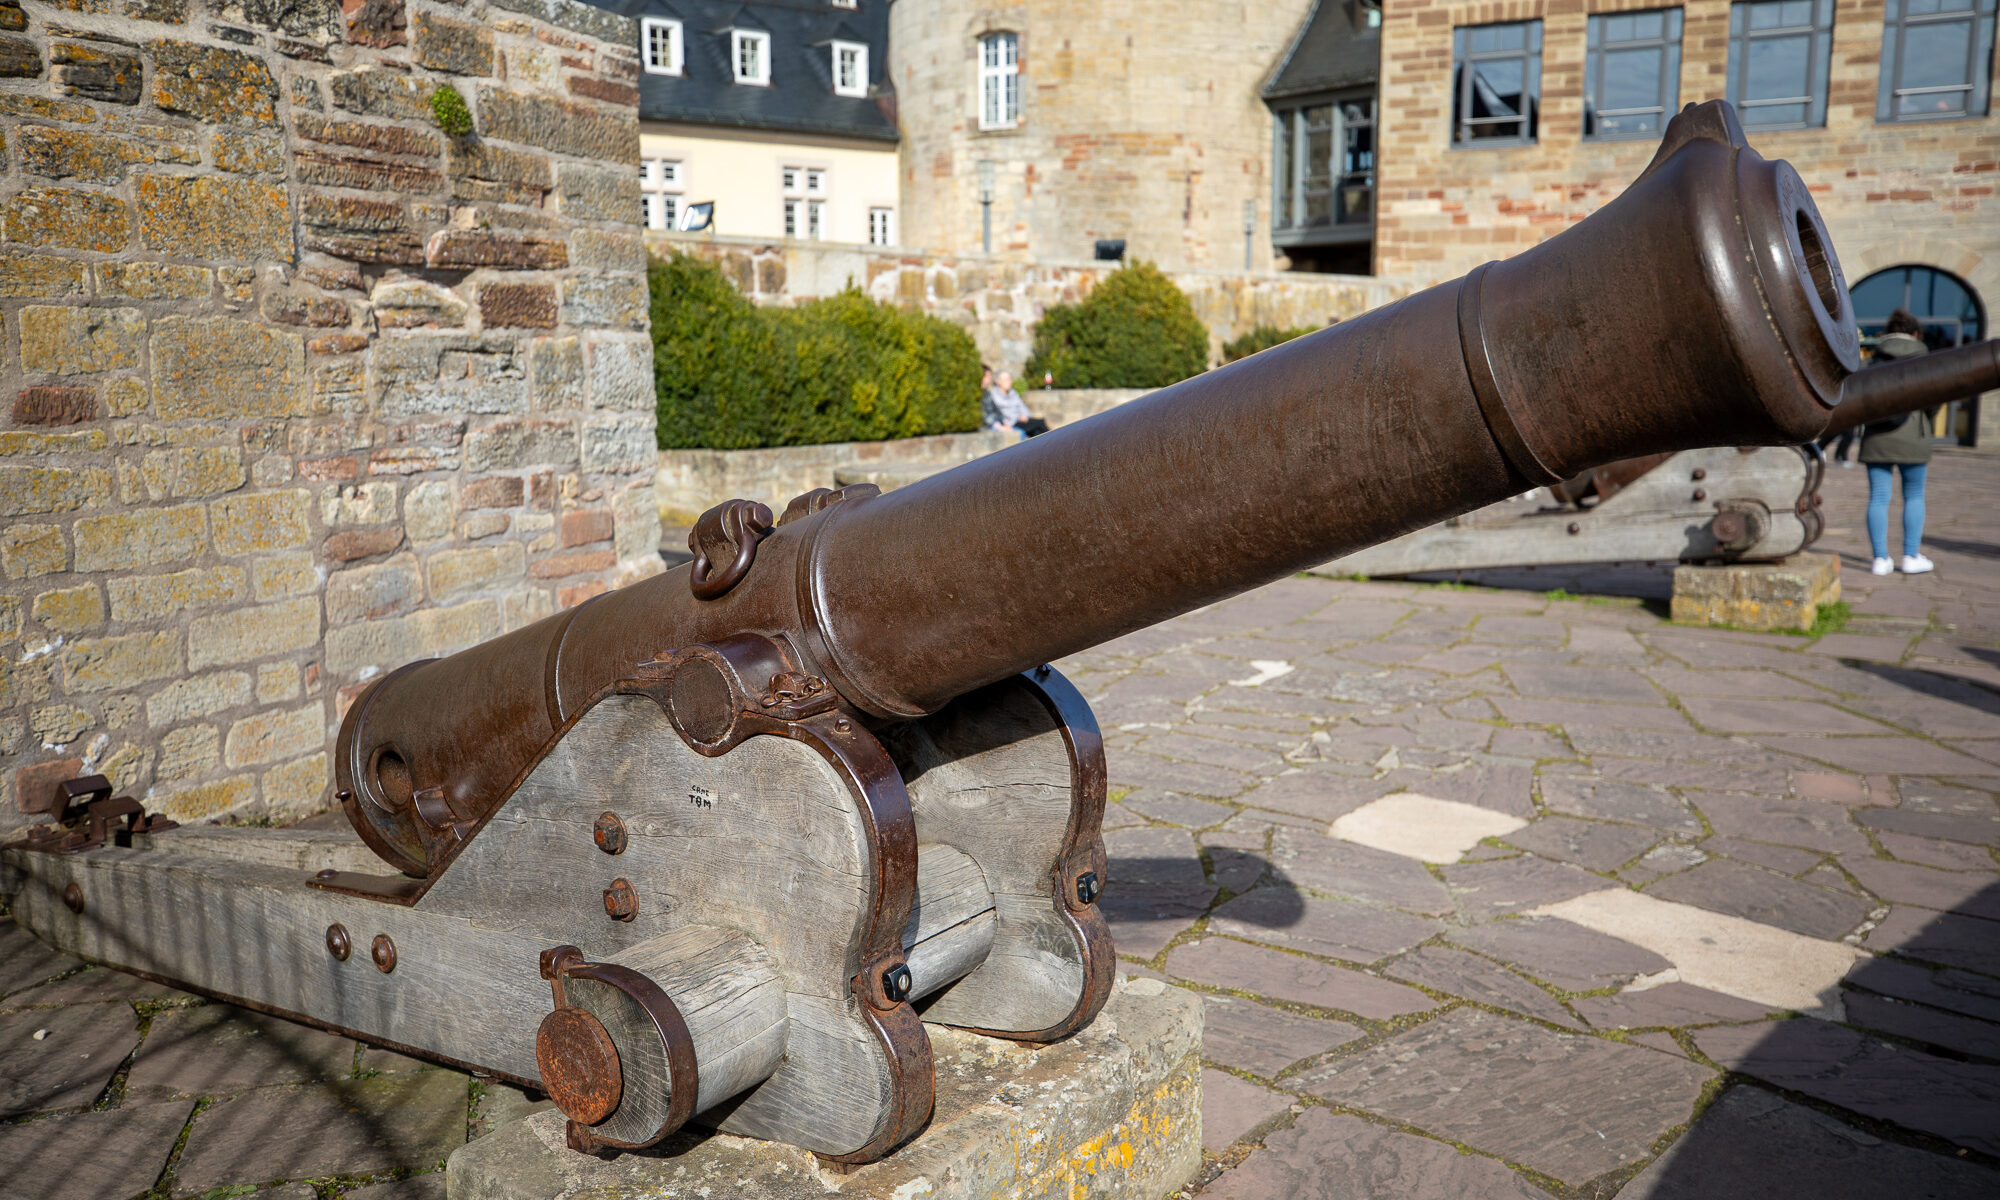 Cannon made in Liege